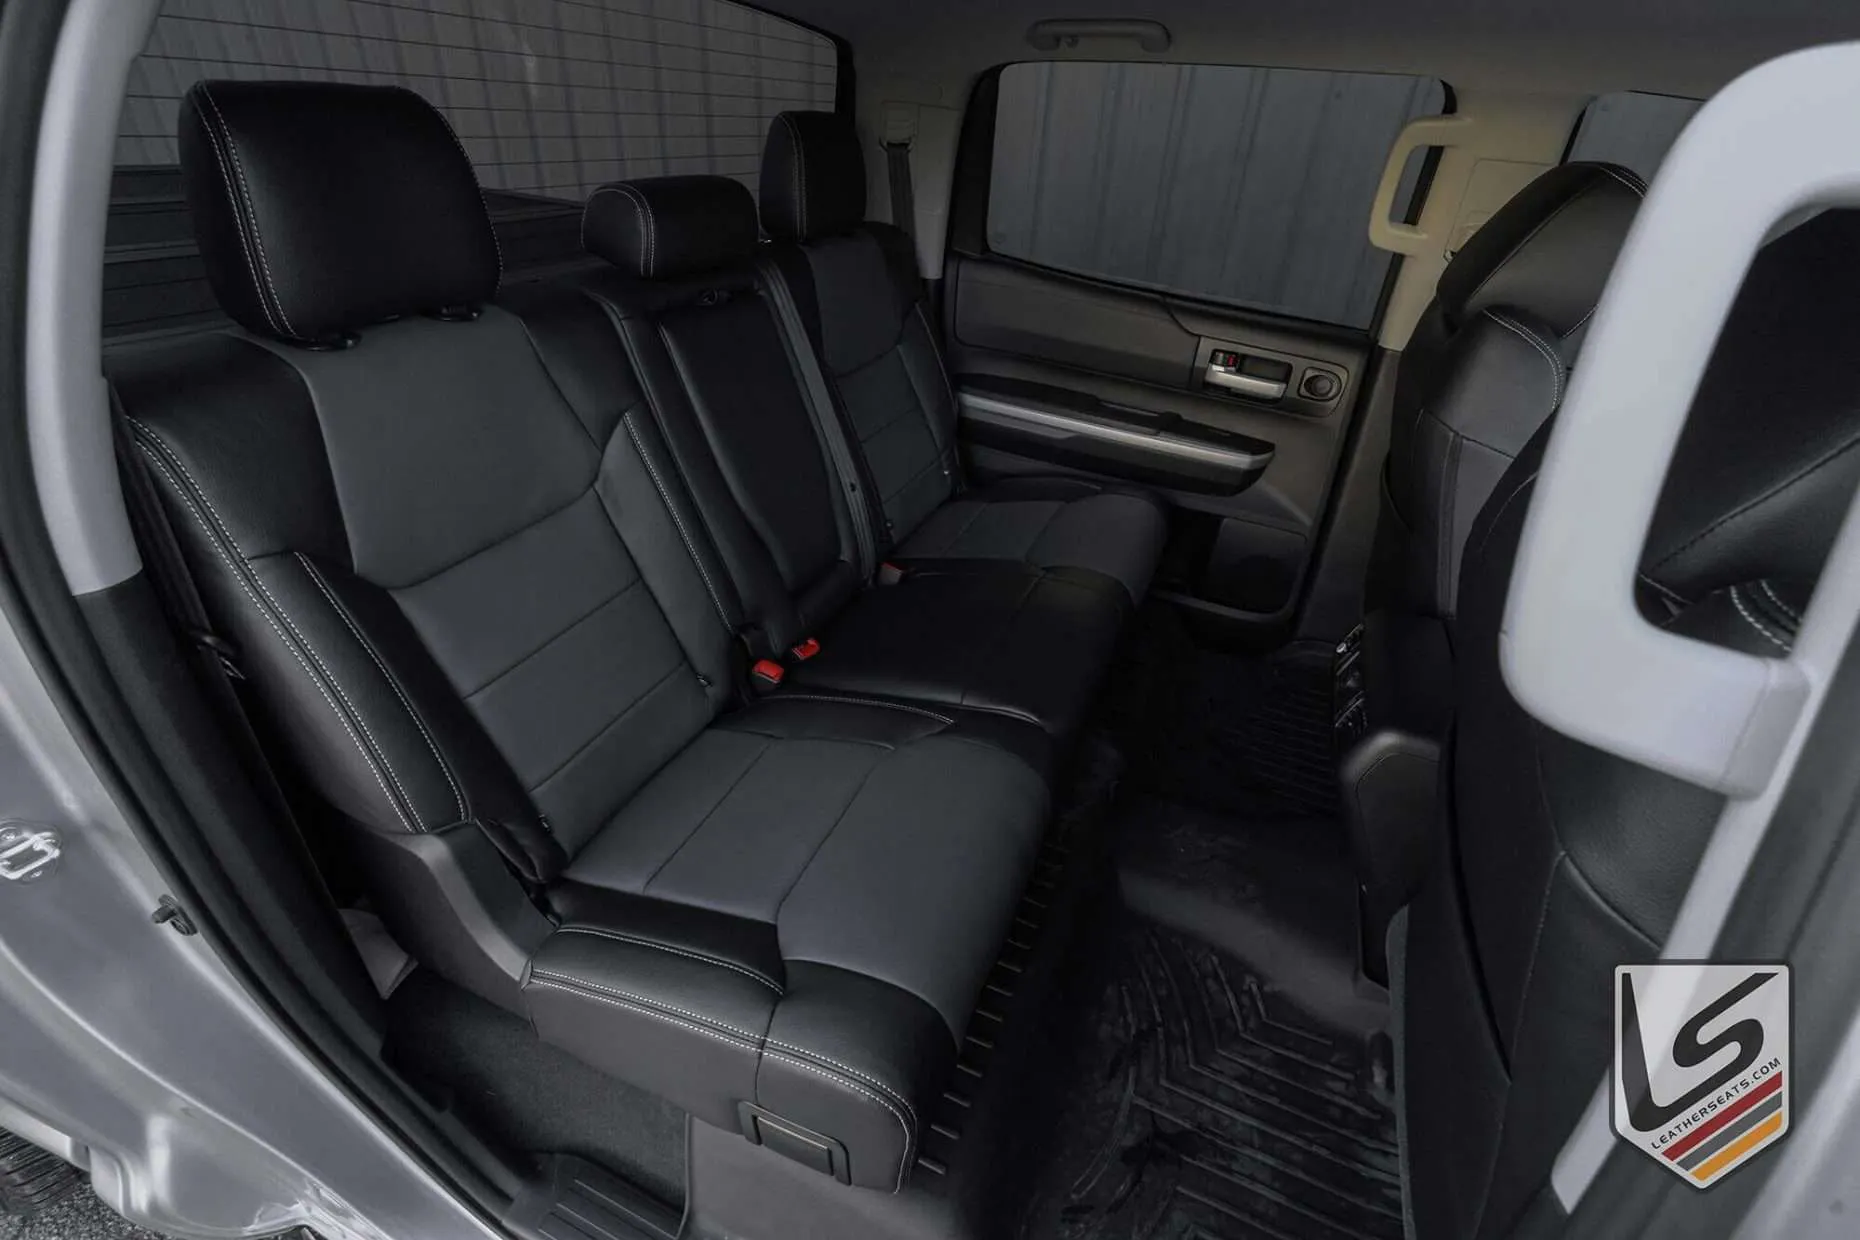 2014-2021 Toyota Tundra CrewMax or doubleCab custom leather seats - Installed rear seats